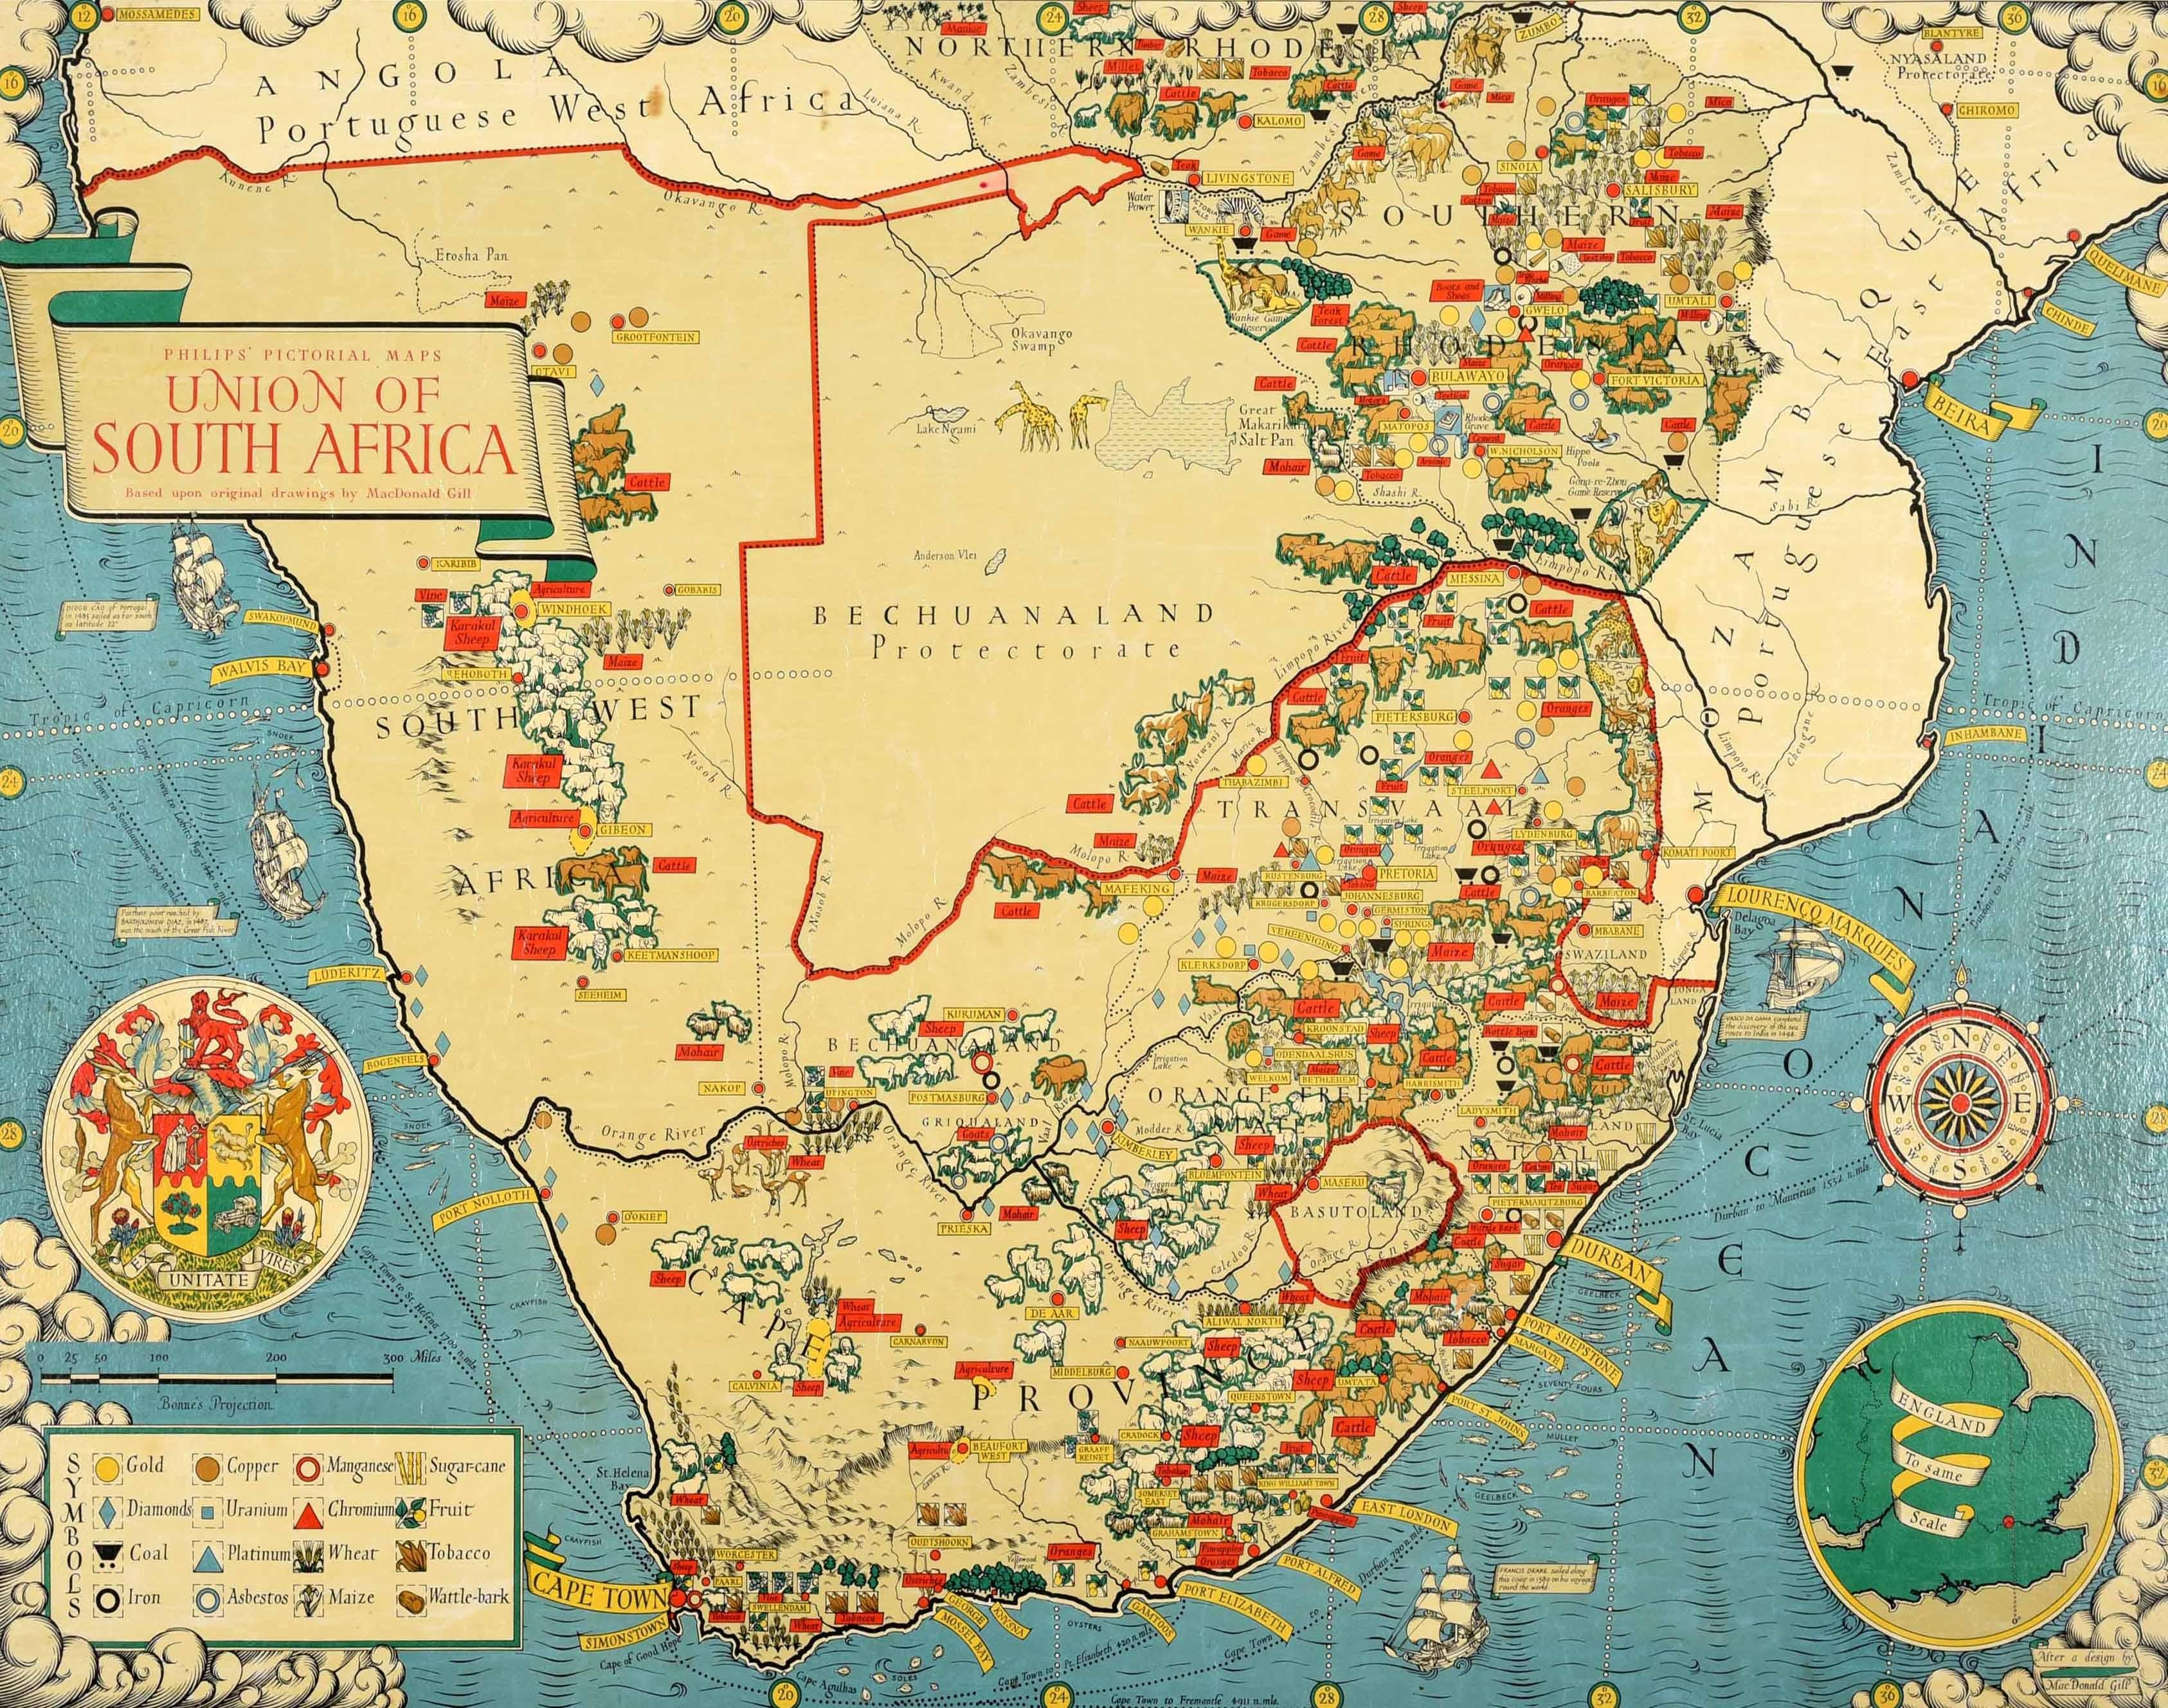 Original vintage illustrated map poster for the Union of South Africa - Philips pictorial map based upon original drawings by notable British graphic designer, cartographer, artist and architect Leslie MacDonald Gill (1884-1947) - Map features